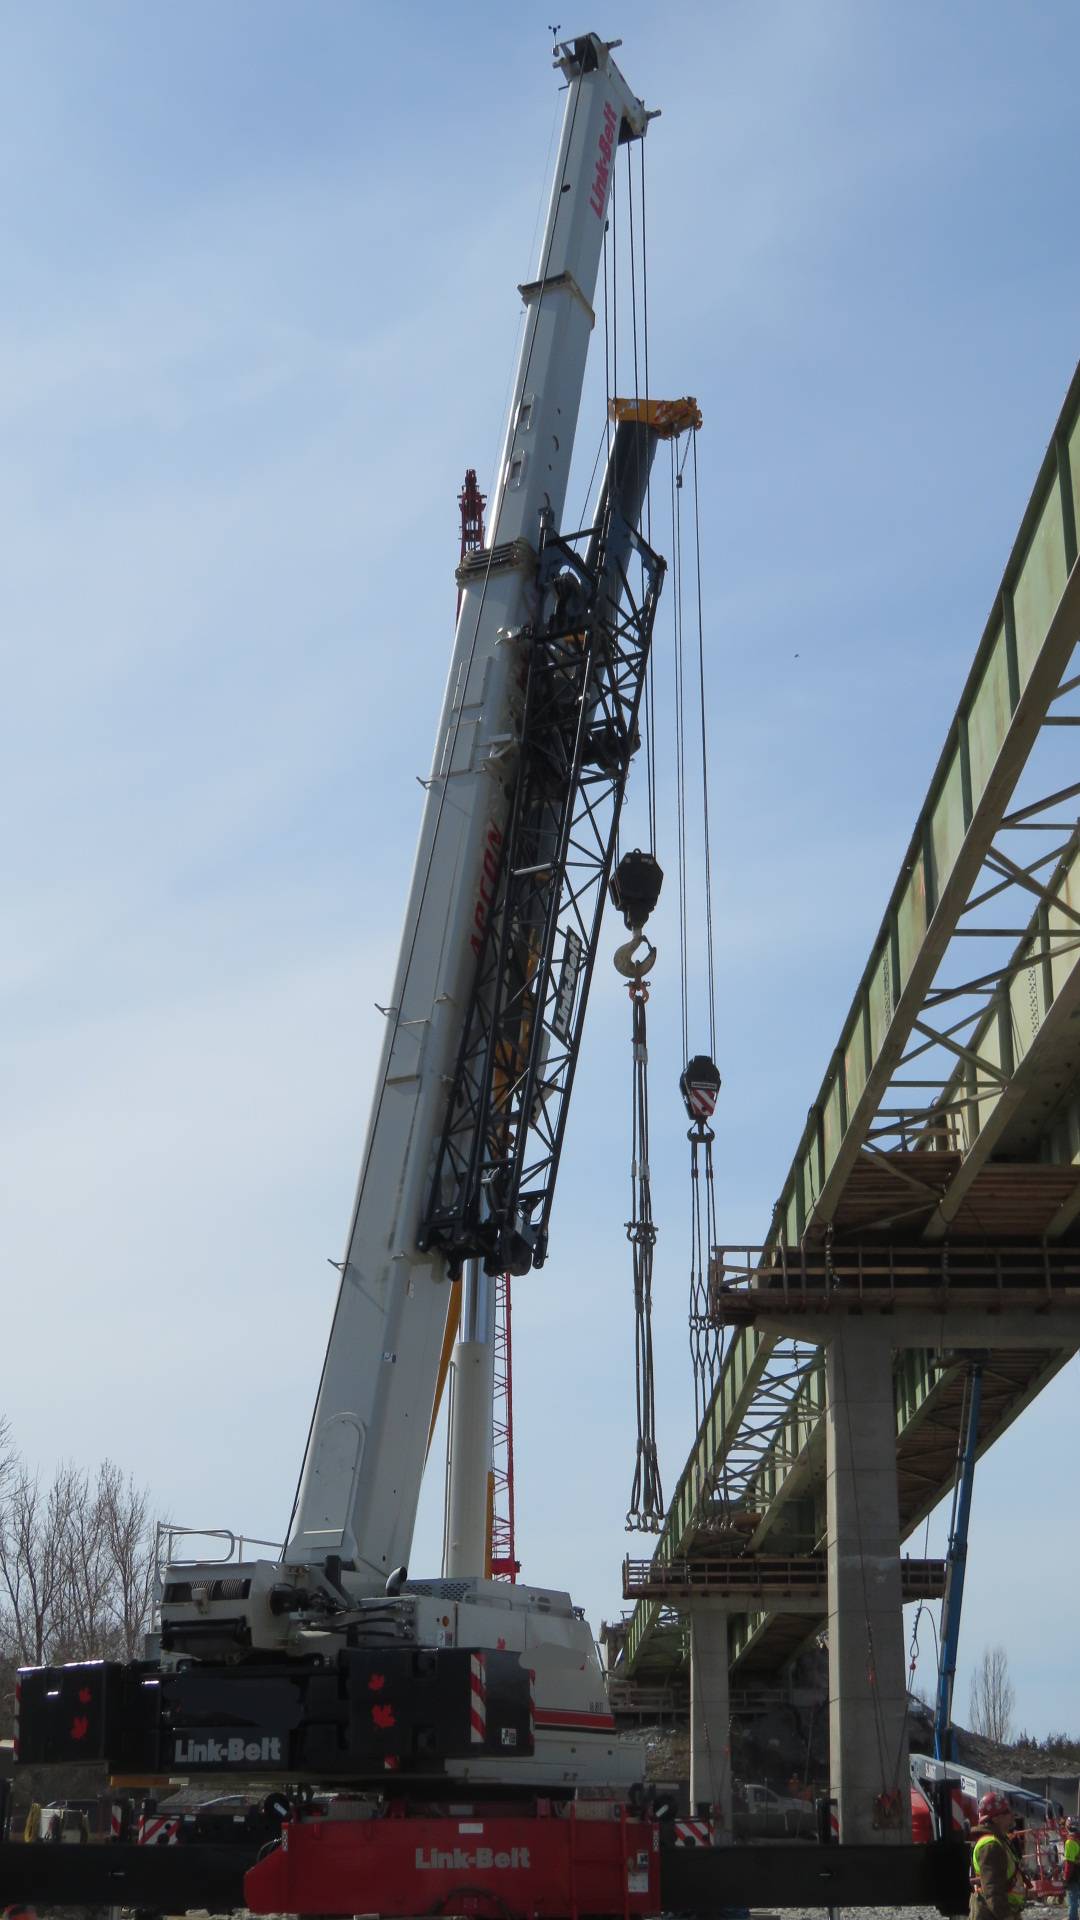 Both cranes lowering the cables for girder removal